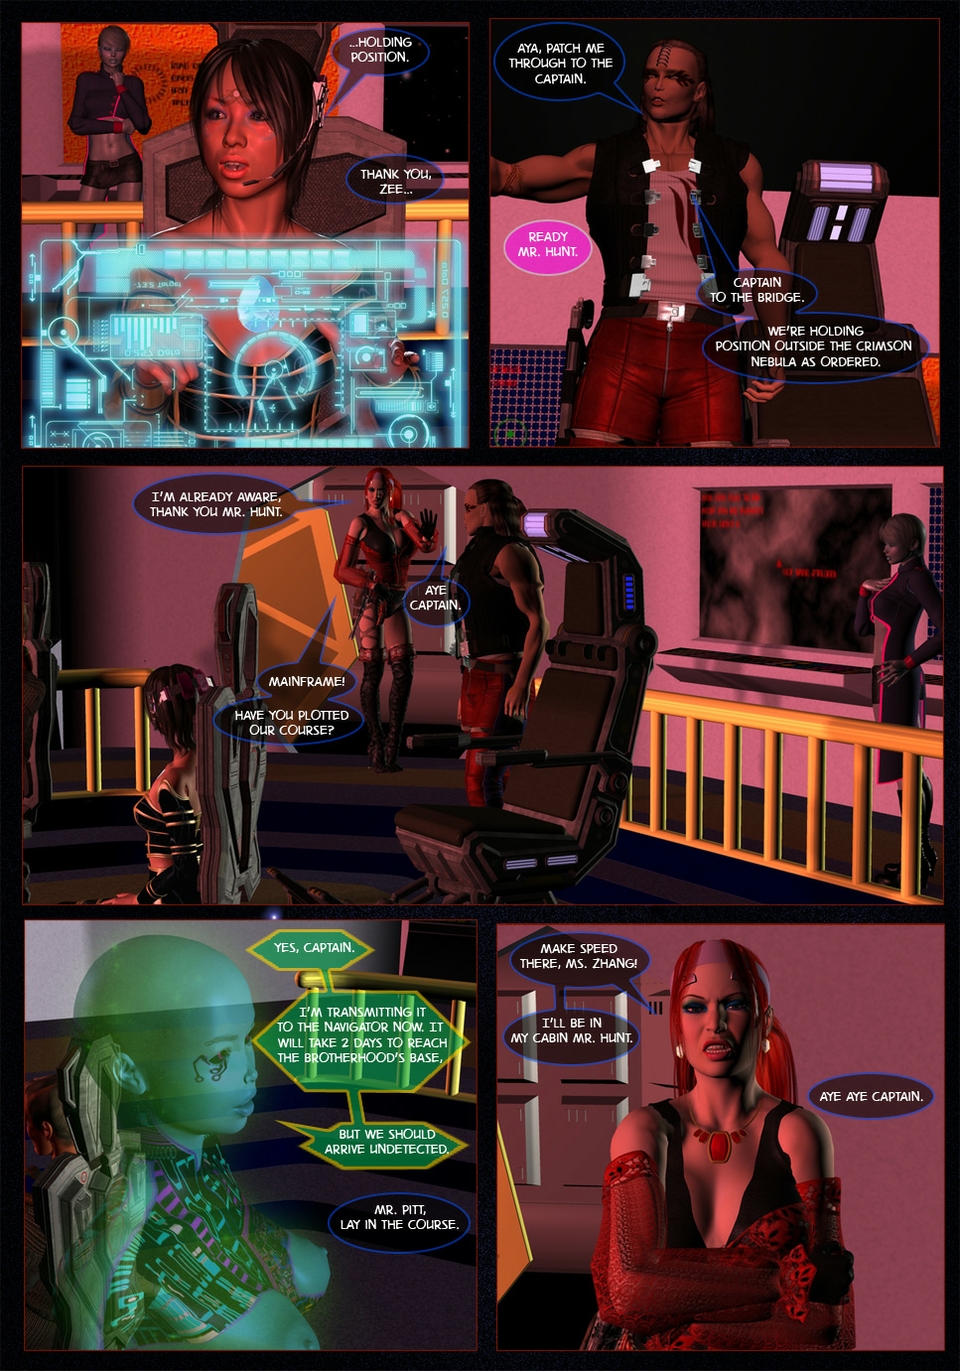 Voyage of the Proken Promise - Issue 8, Page 2 - Captain's Orders